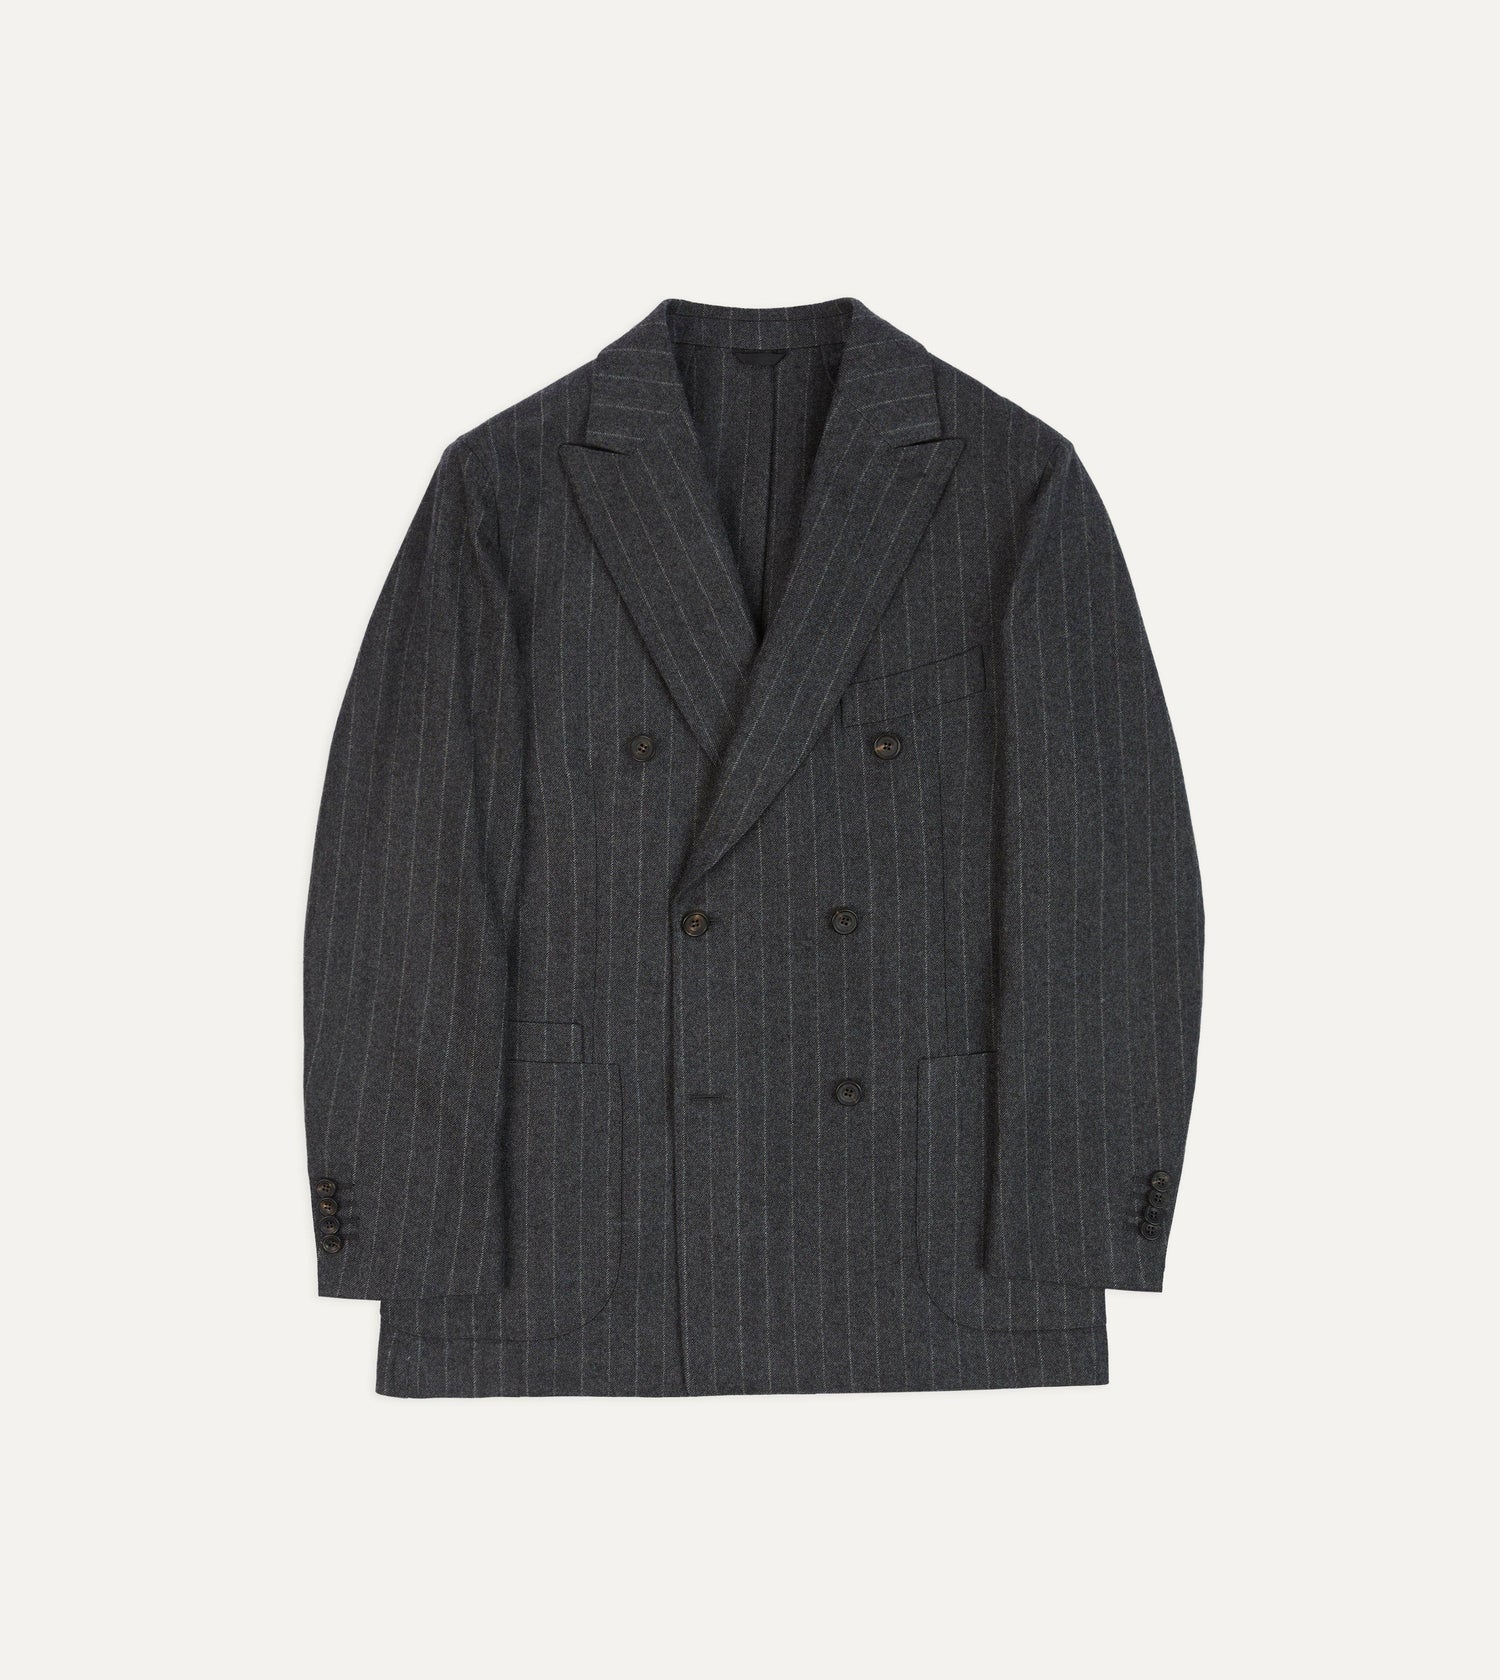 ALD / Drake's Double Breasted Chalkstripe Suit Jacket